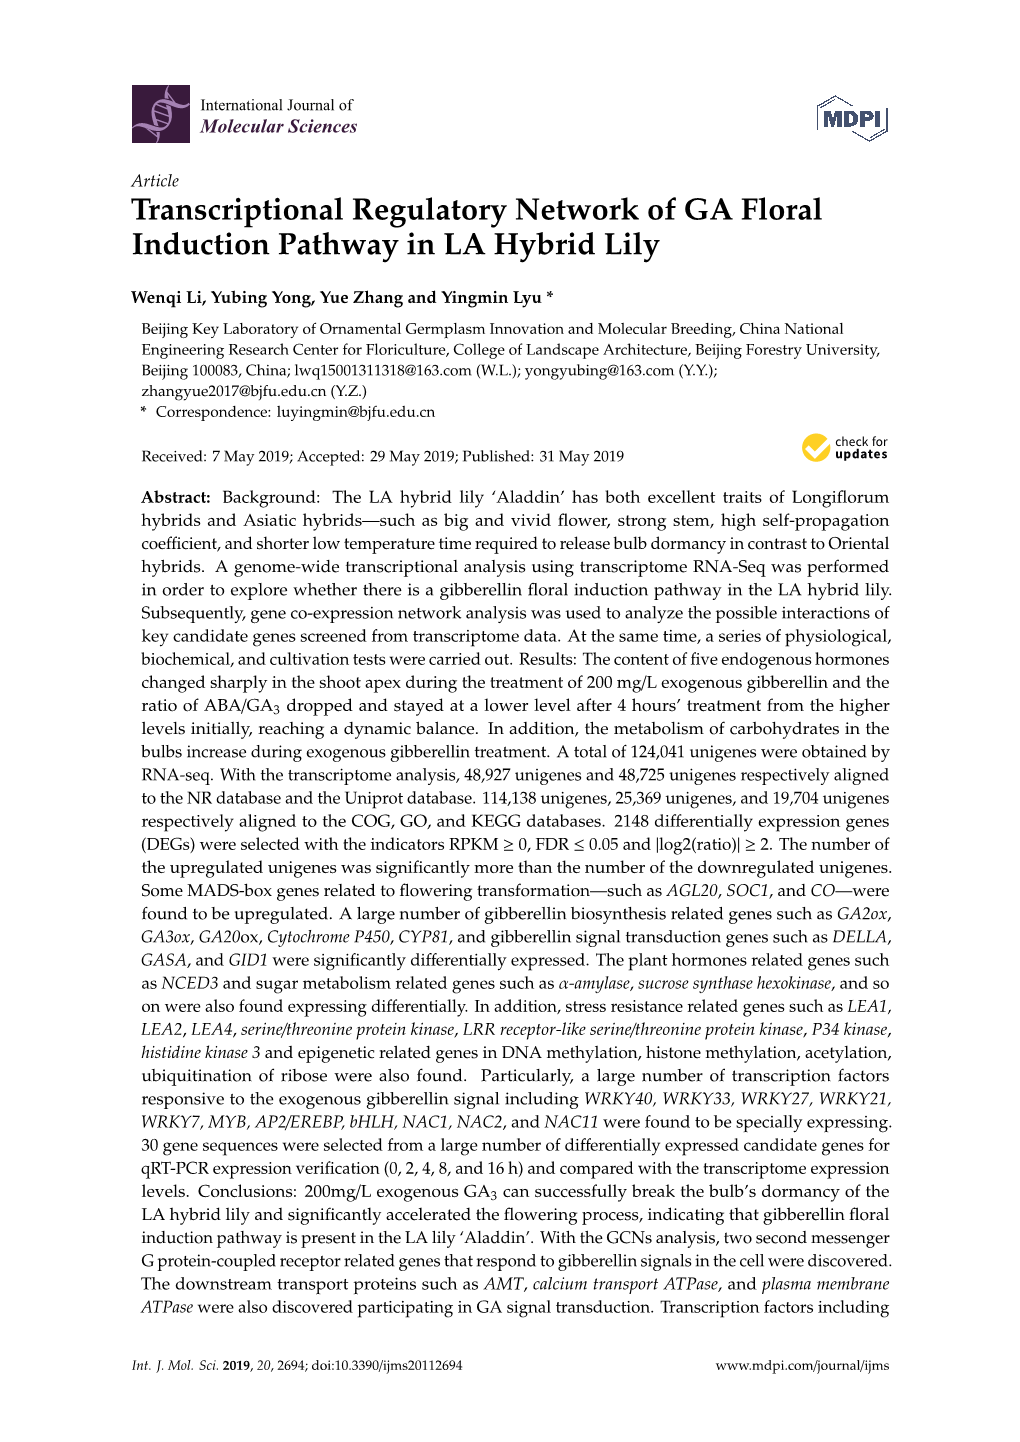 Transcriptional Regulatory Network of GA Floral Induction Pathway in LA Hybrid Lily